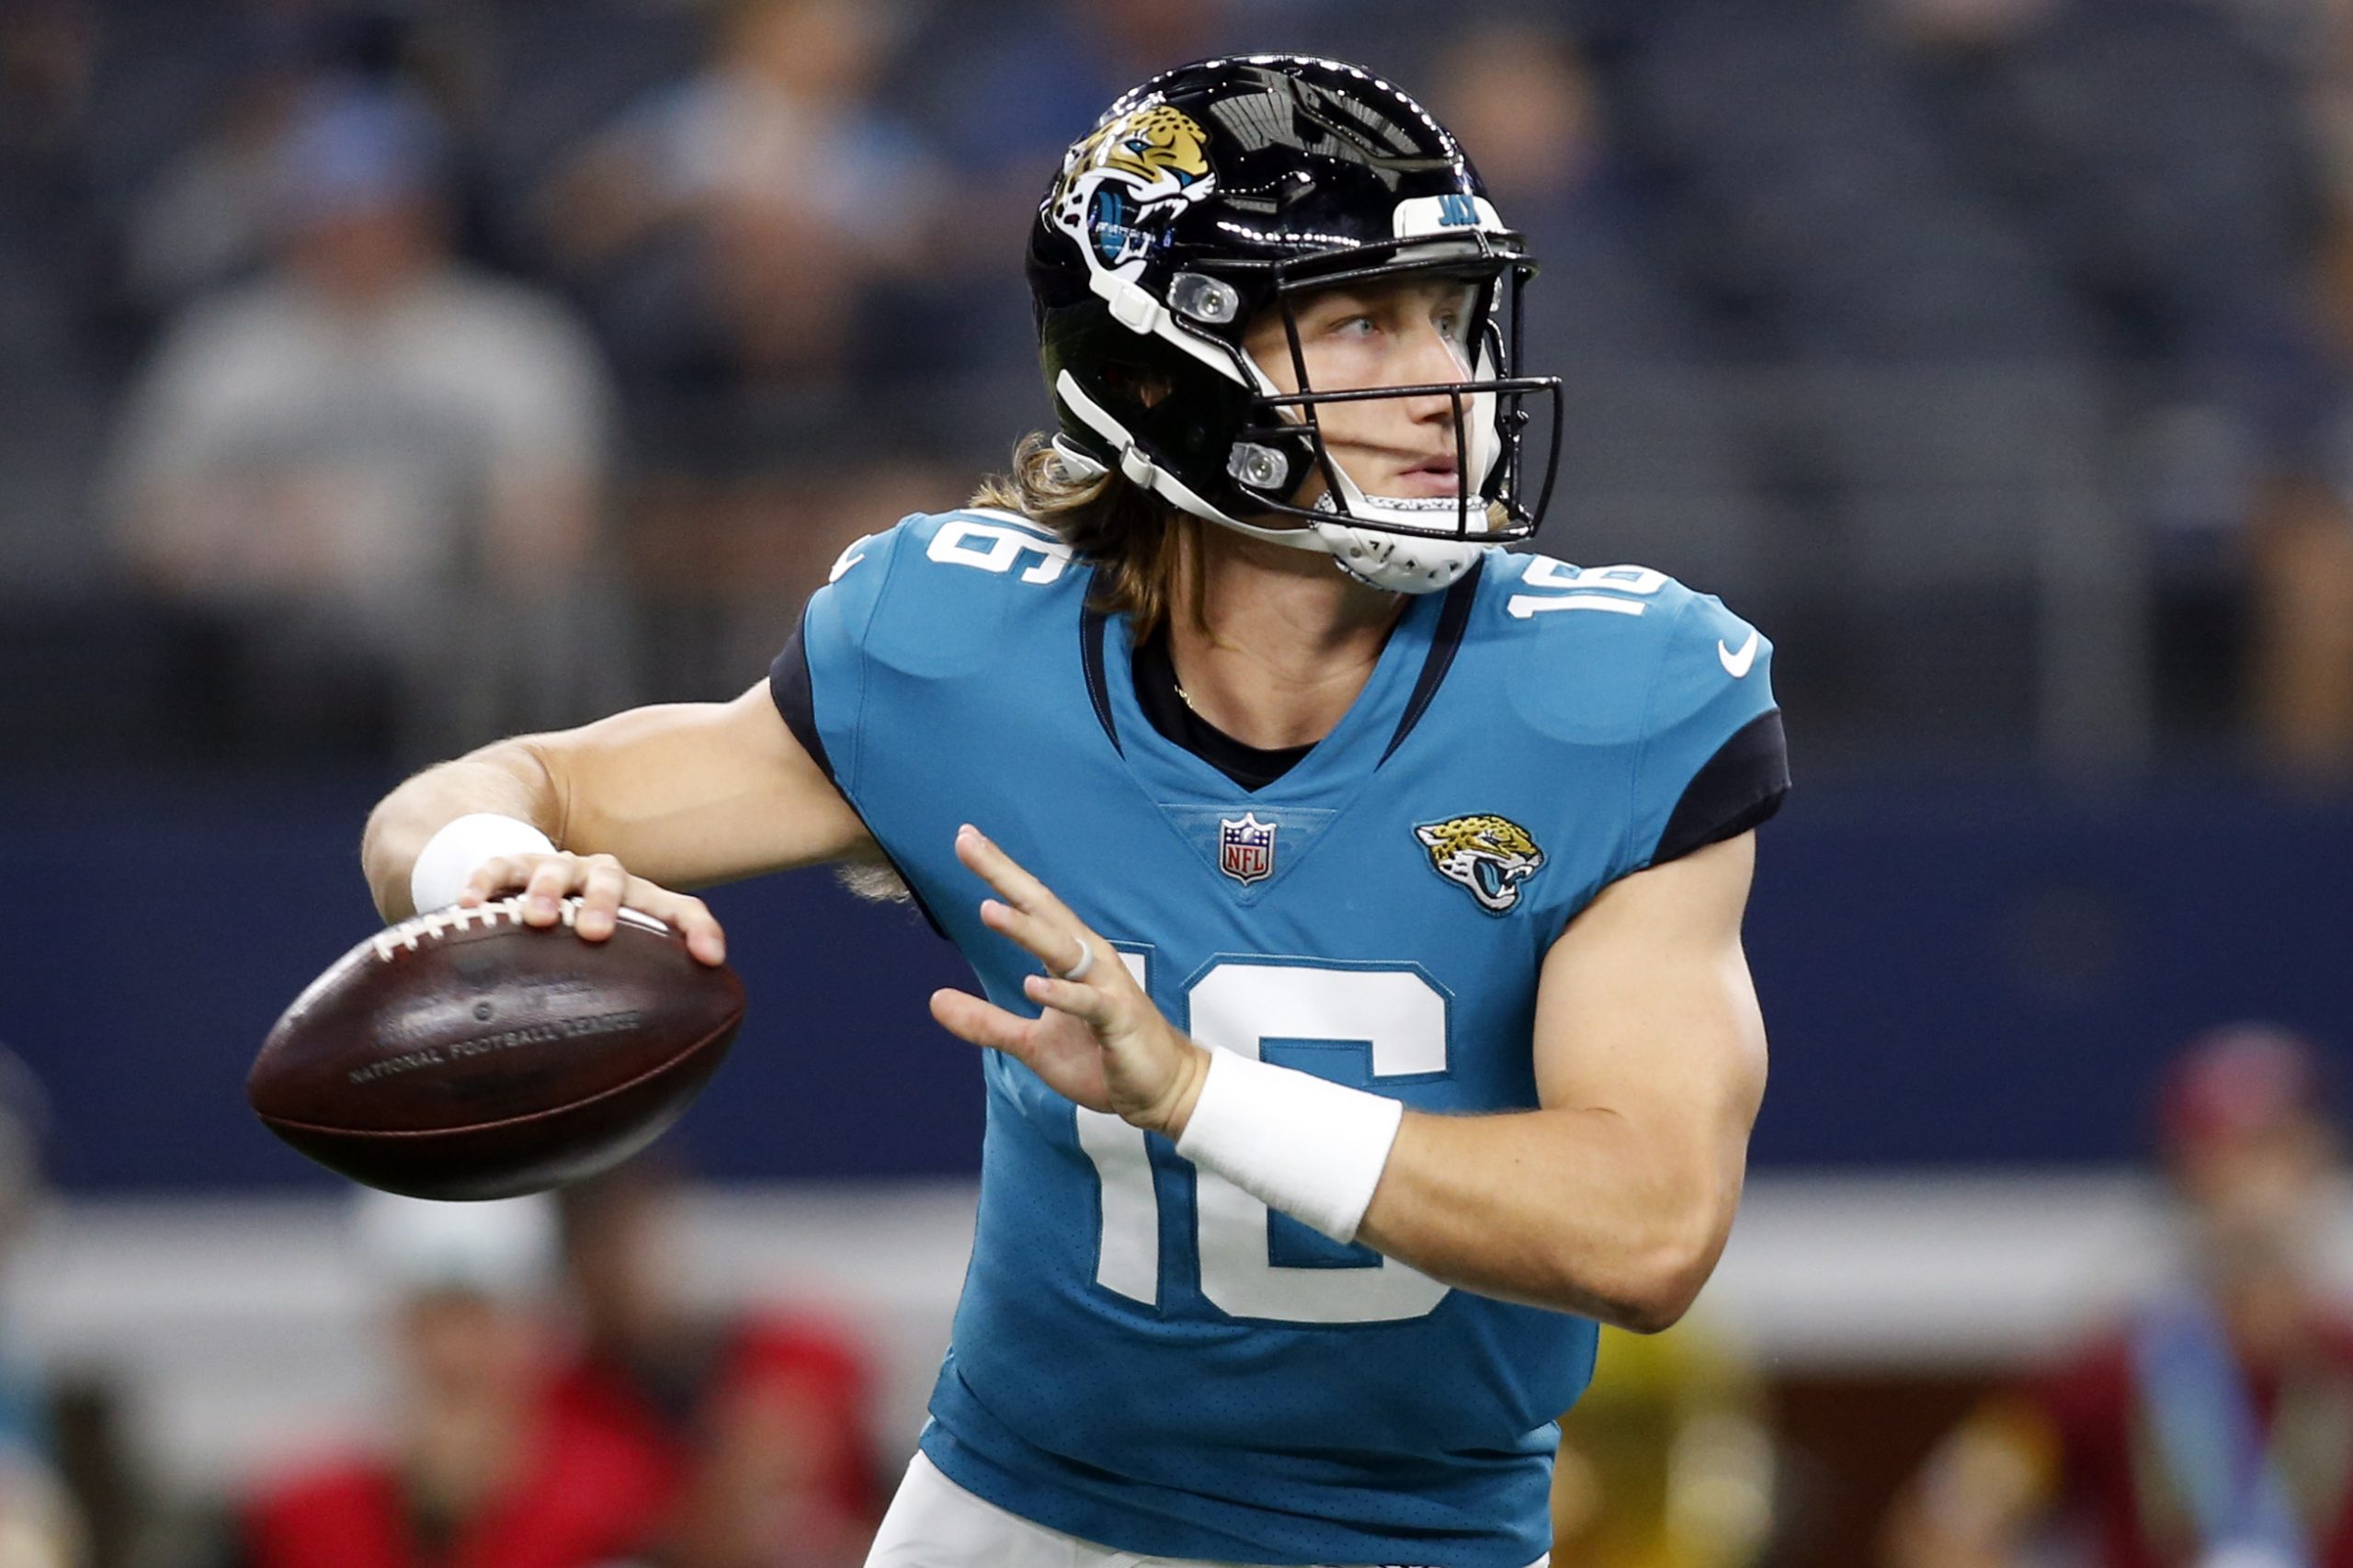 Jacksonville Jaguars quarterback Trevor Lawrence (16) rolls out to throw a pass in the first quarter of a preseason game against the Dallas Cowboys at AT&T Stadium.